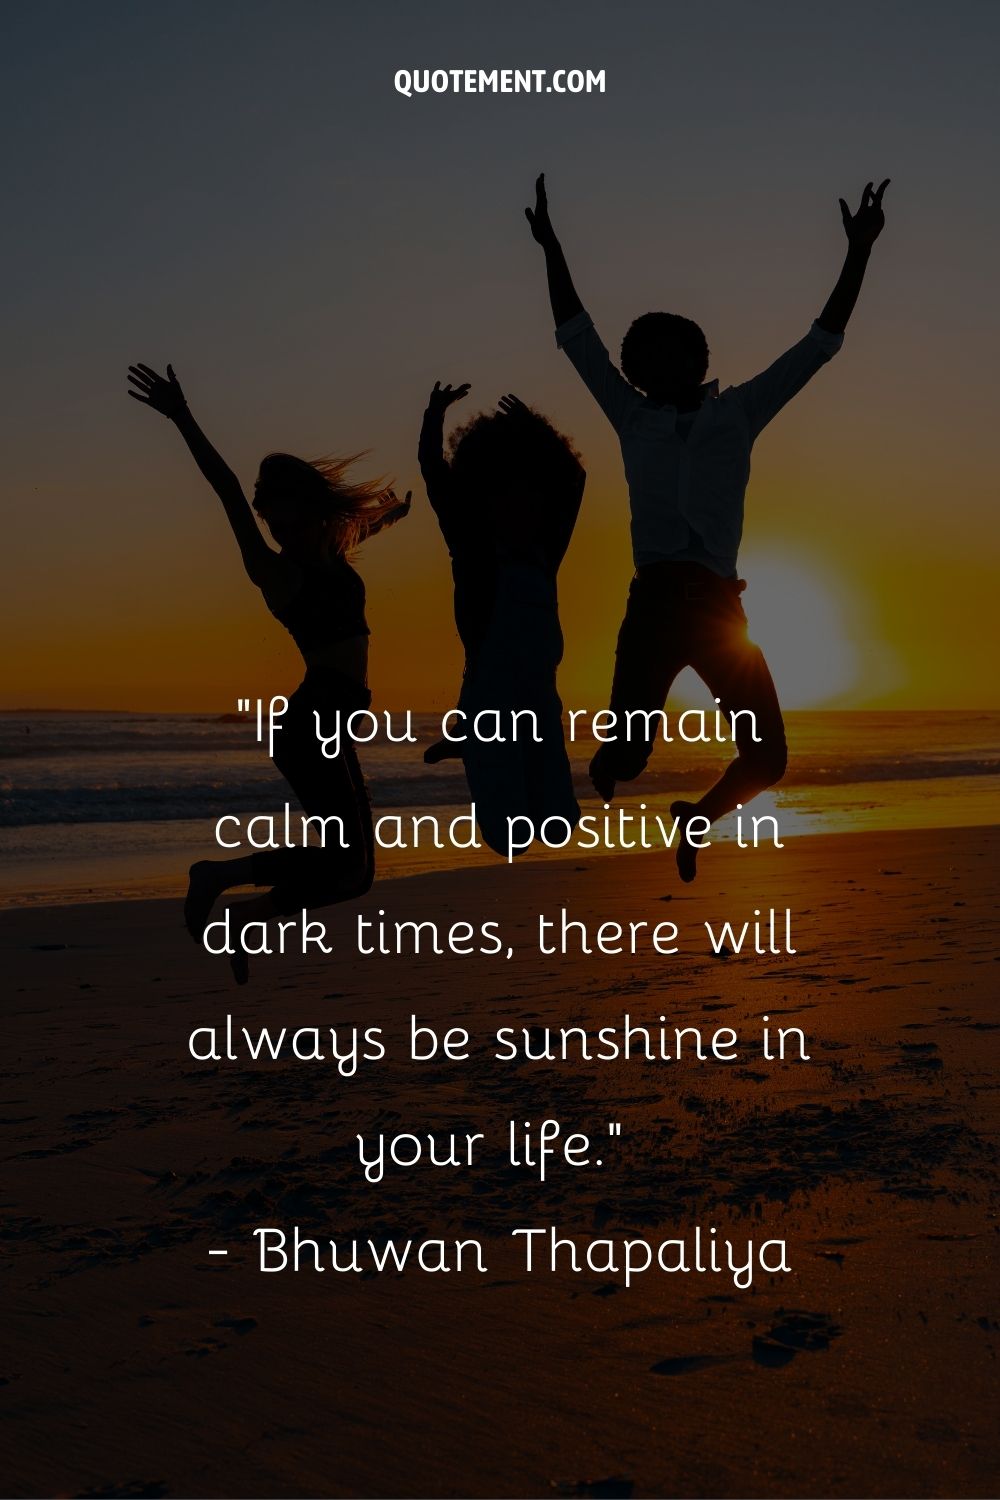 If you can remain calm and positive in dark times, there will always be sunshine in your life.